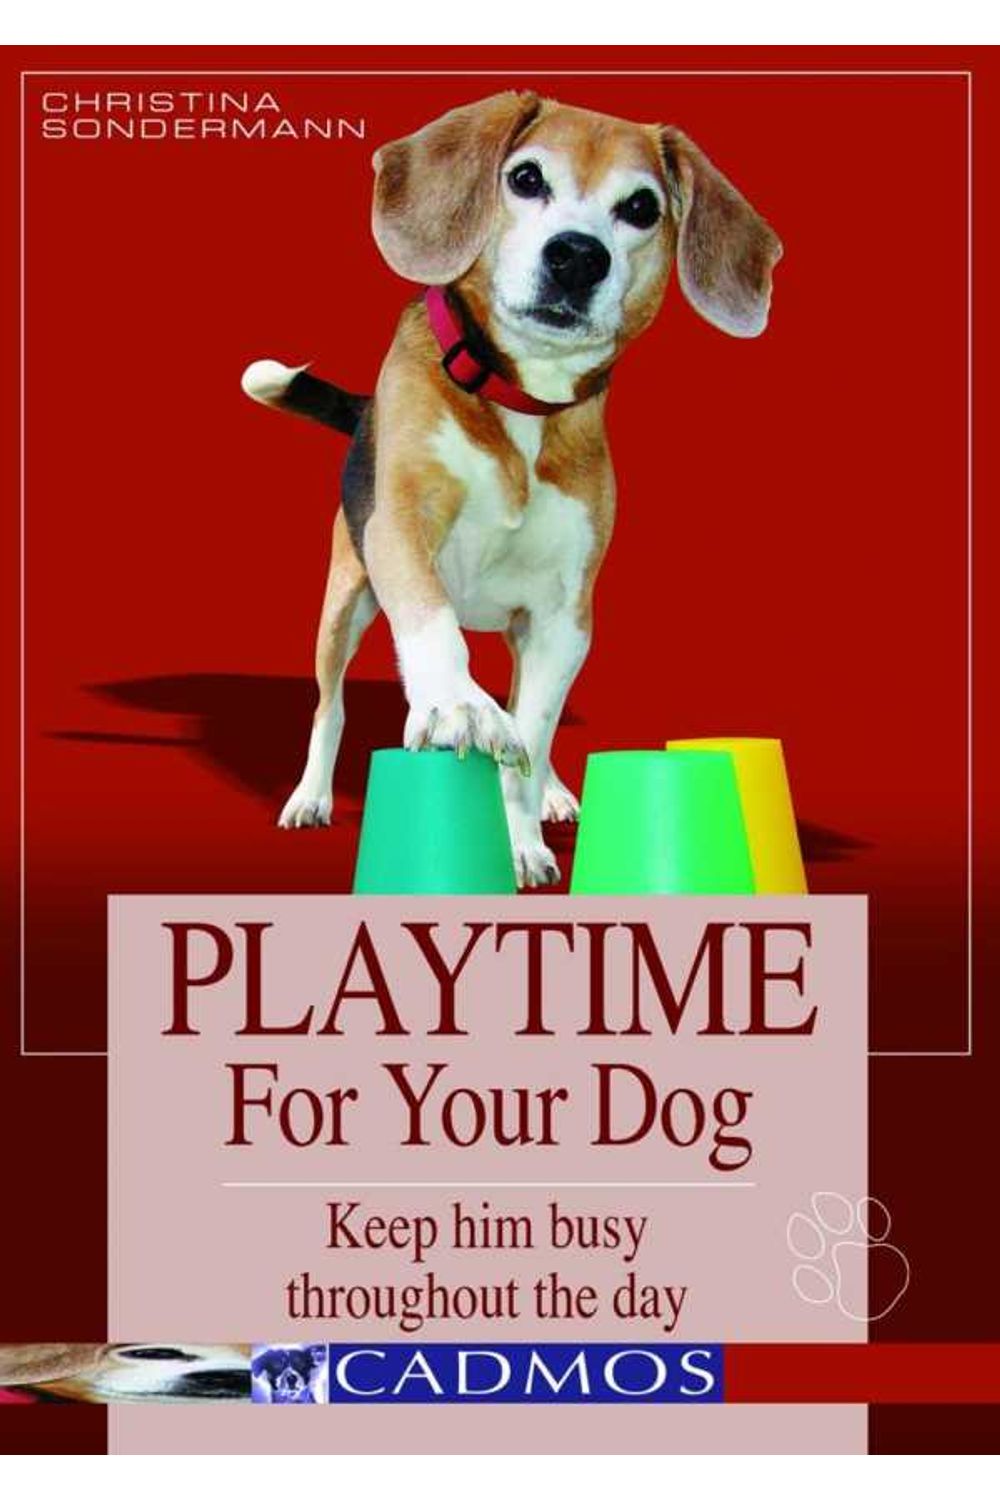 bw-playtime-for-your-dog-cadmos-publishing-9780857886606